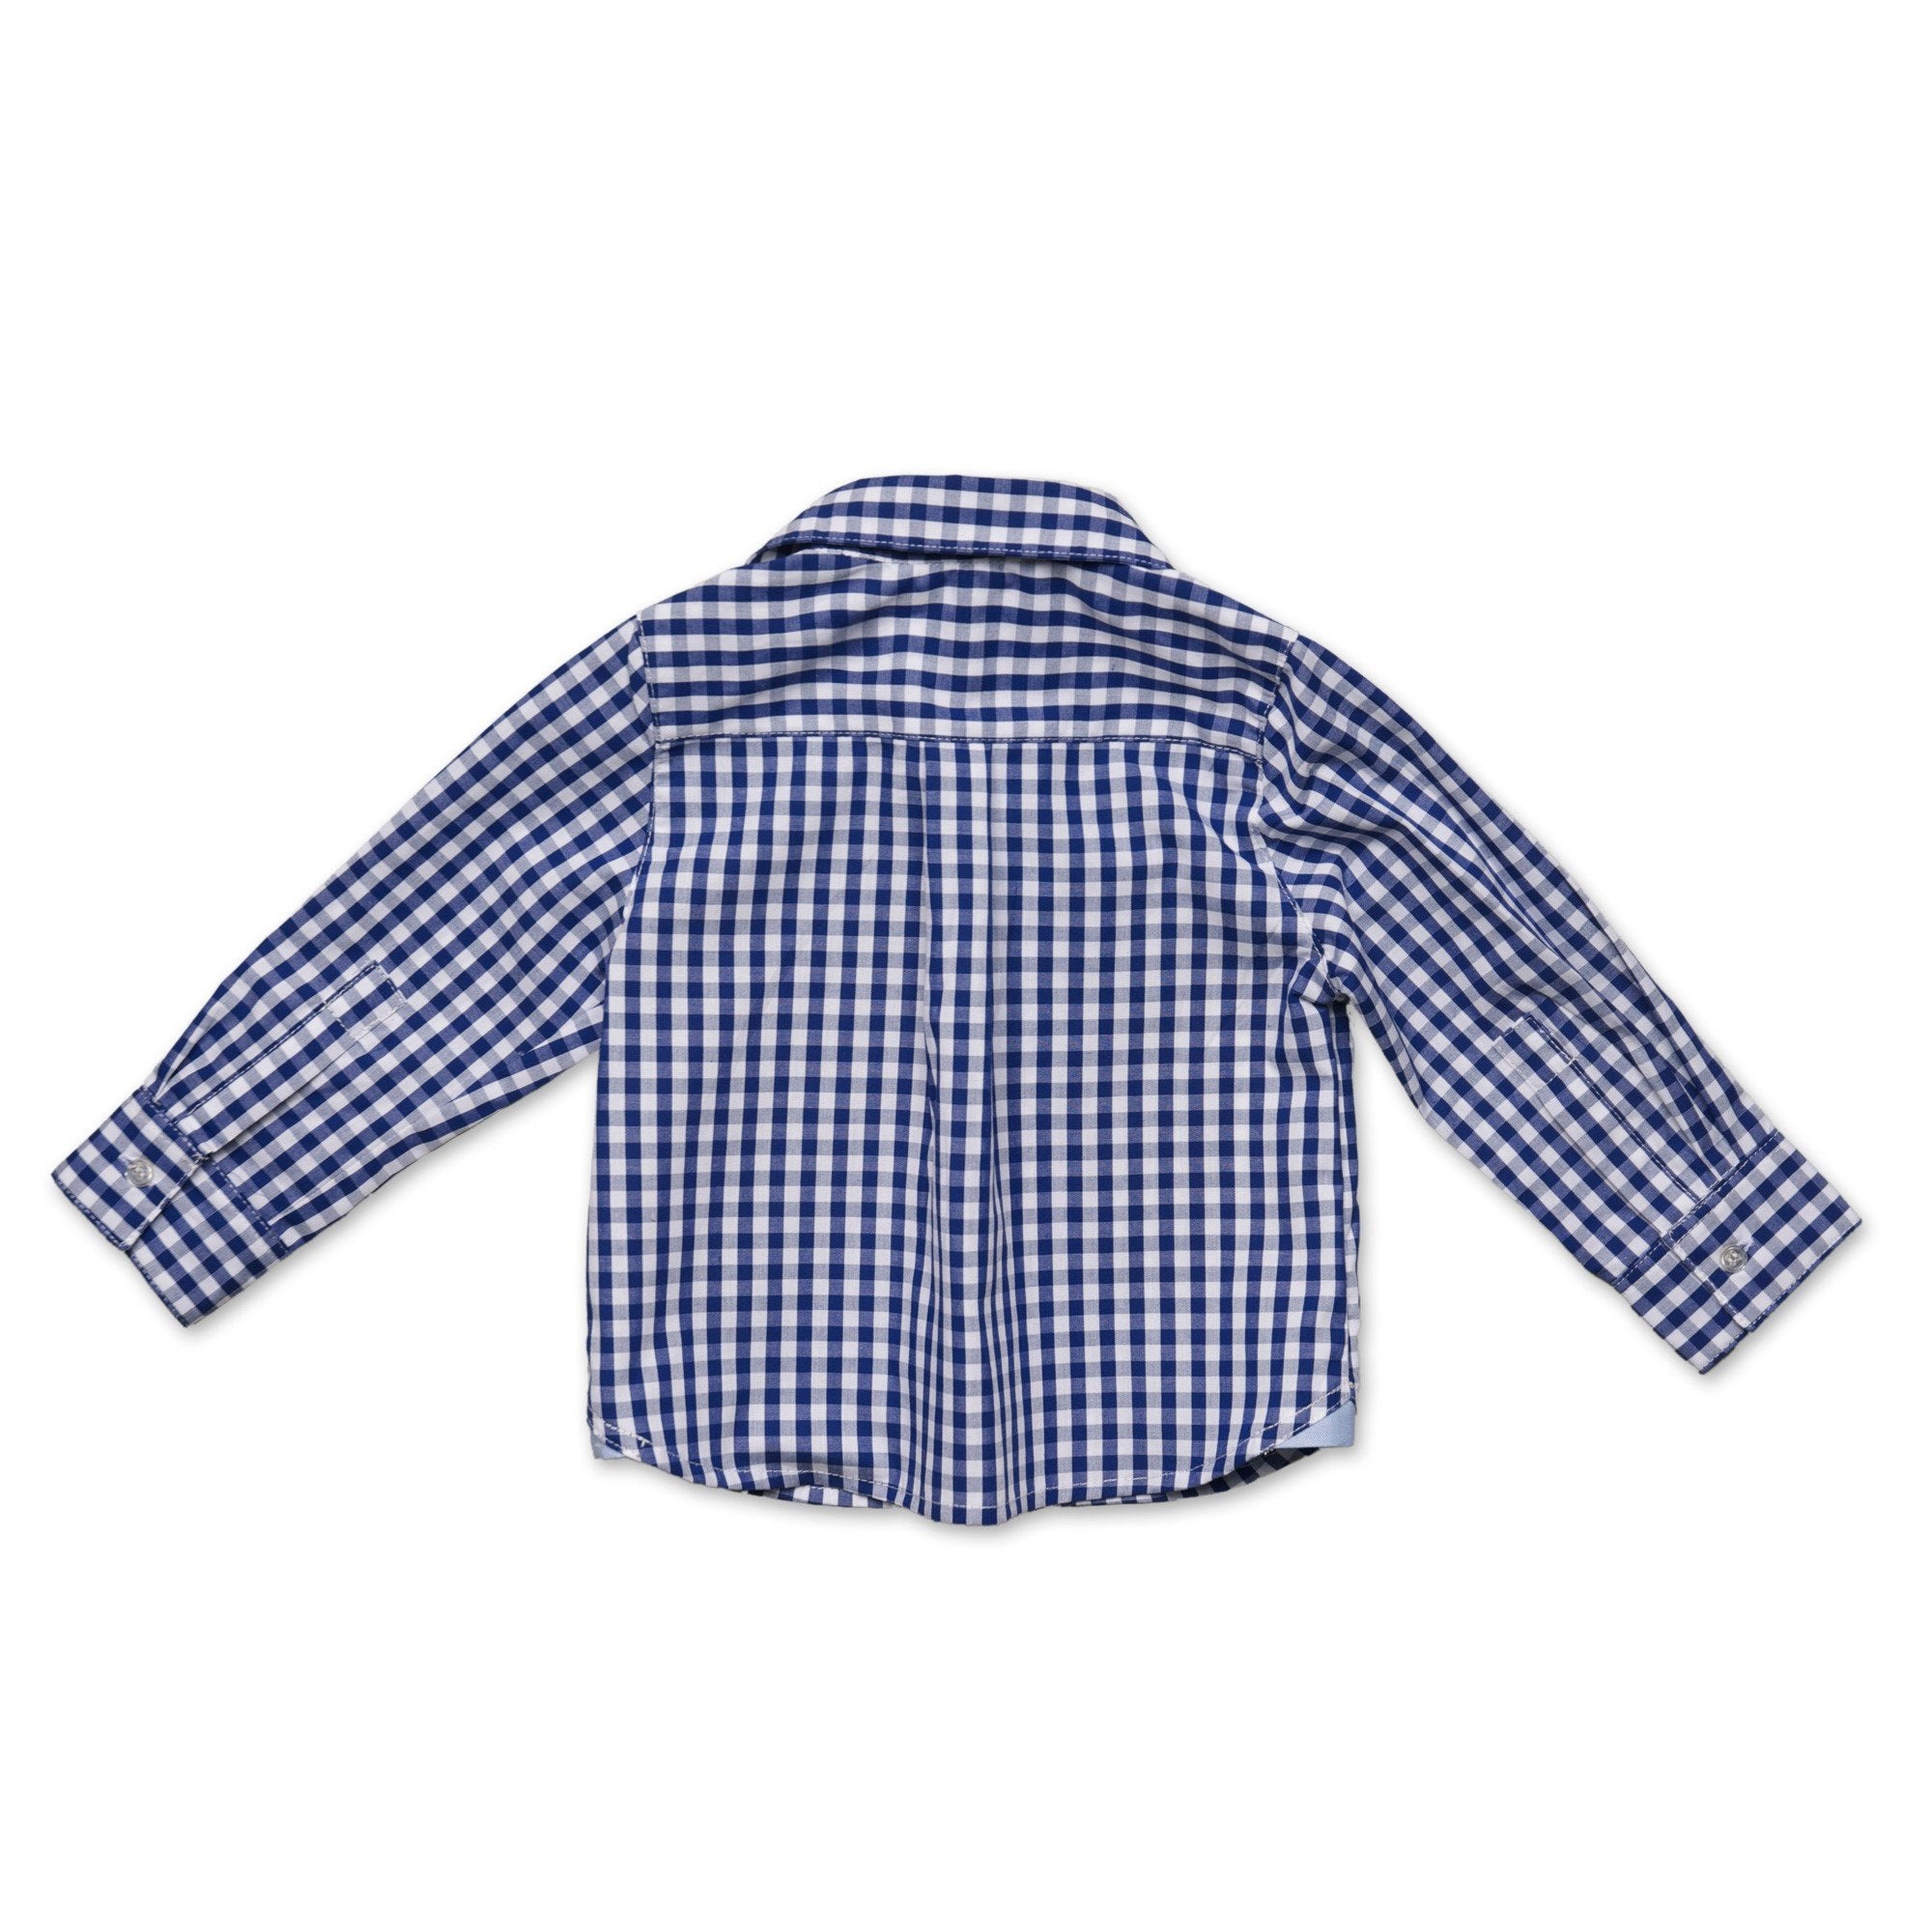 Boys Blue Gingham Shirt With Contrast Cuff - Cou Cou Baby